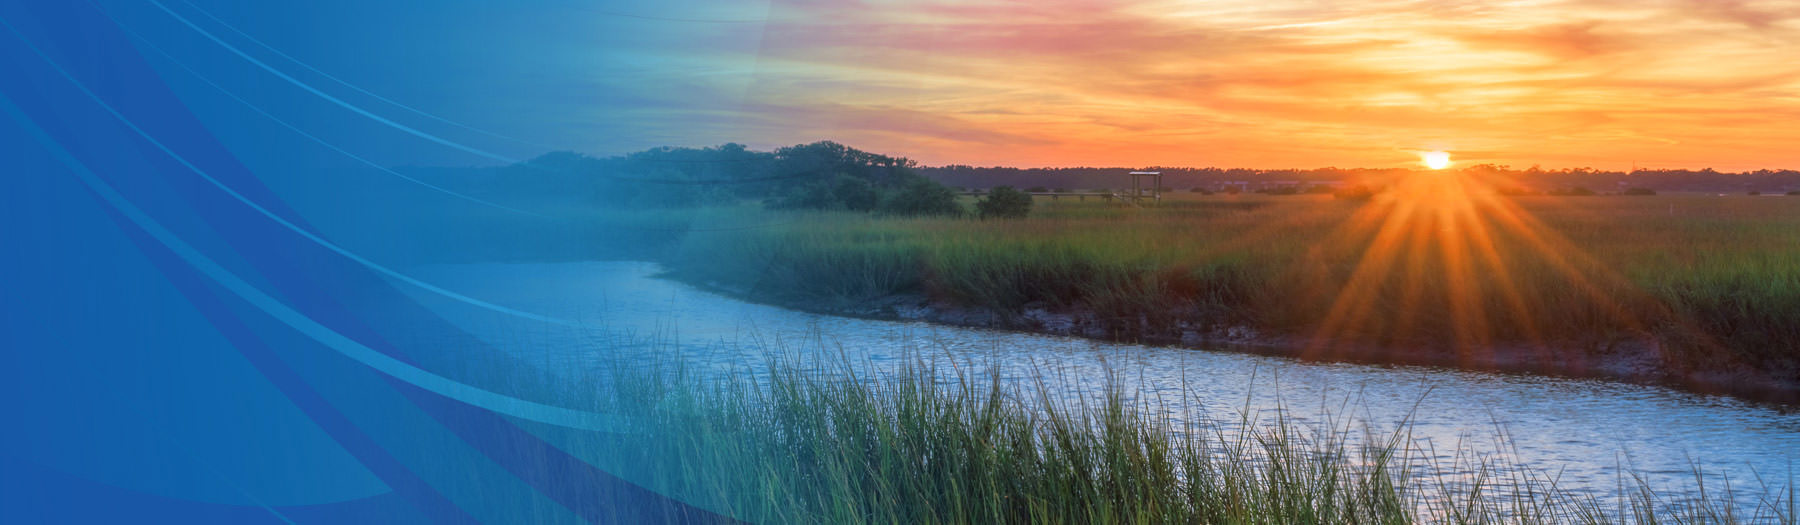 Sun setting over a beautiful landscape with a river and tall grass in the foreground